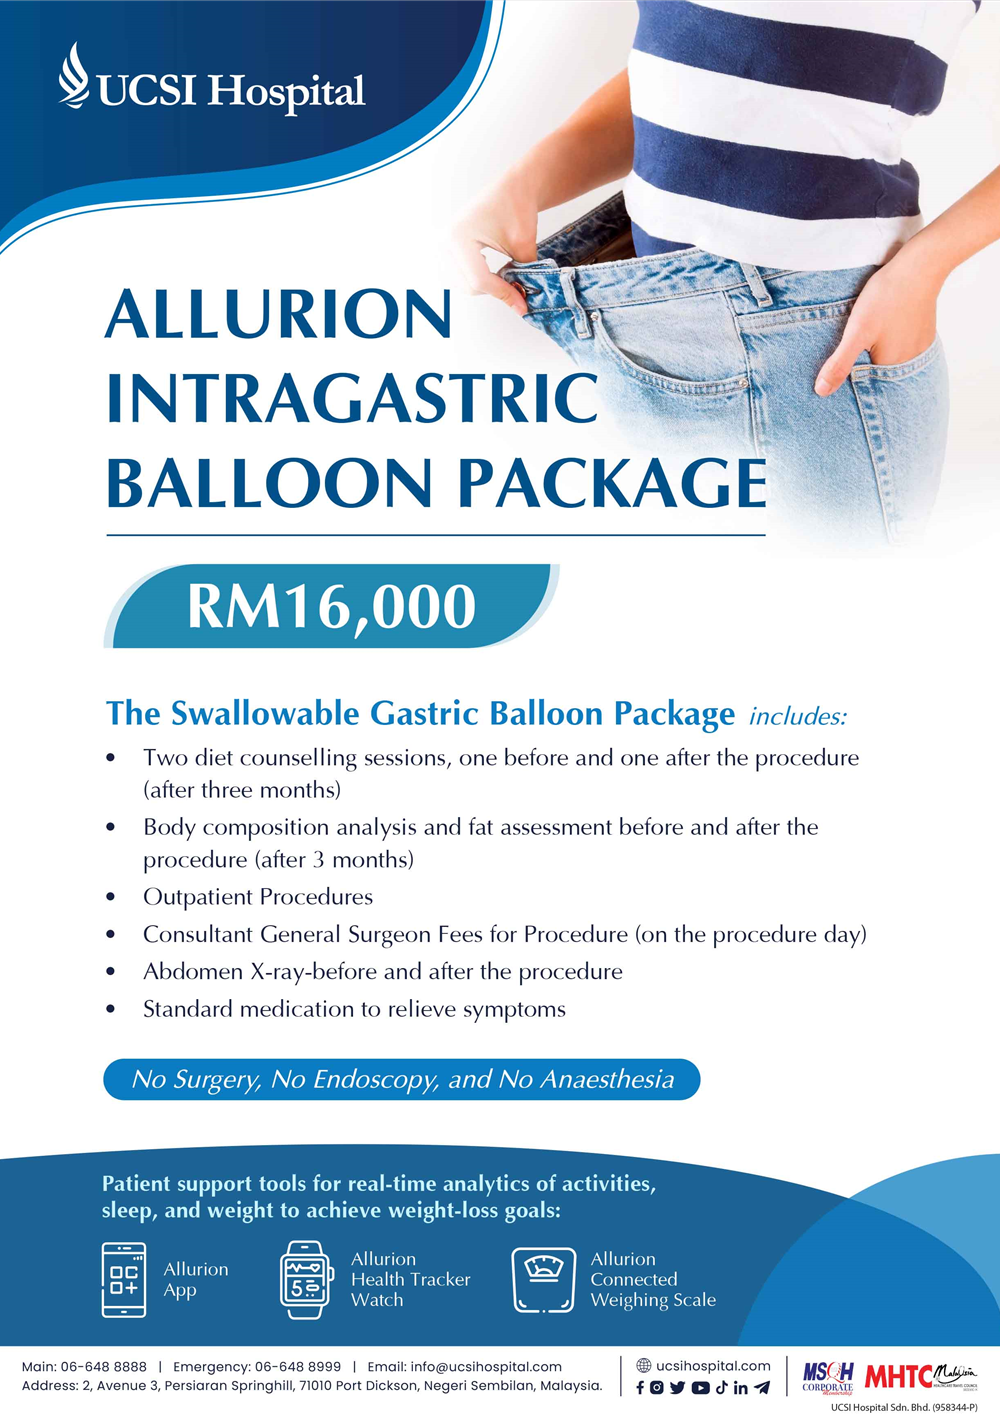 Allurion Intragastric Balloon Package